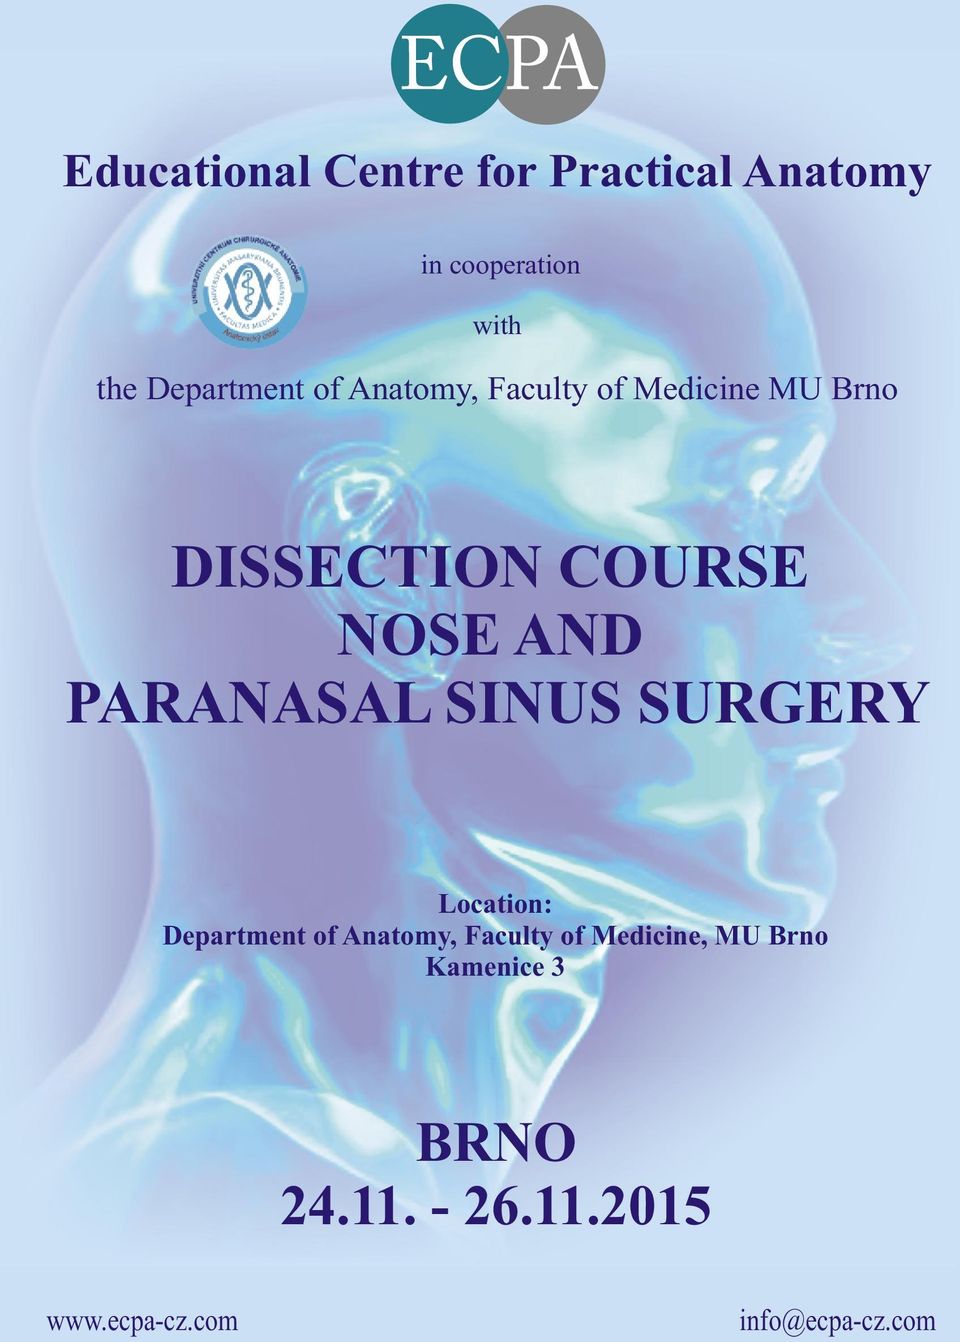 AND PARANASAL SINUS SURGERY Location: Department of Anatomy, Faculty of